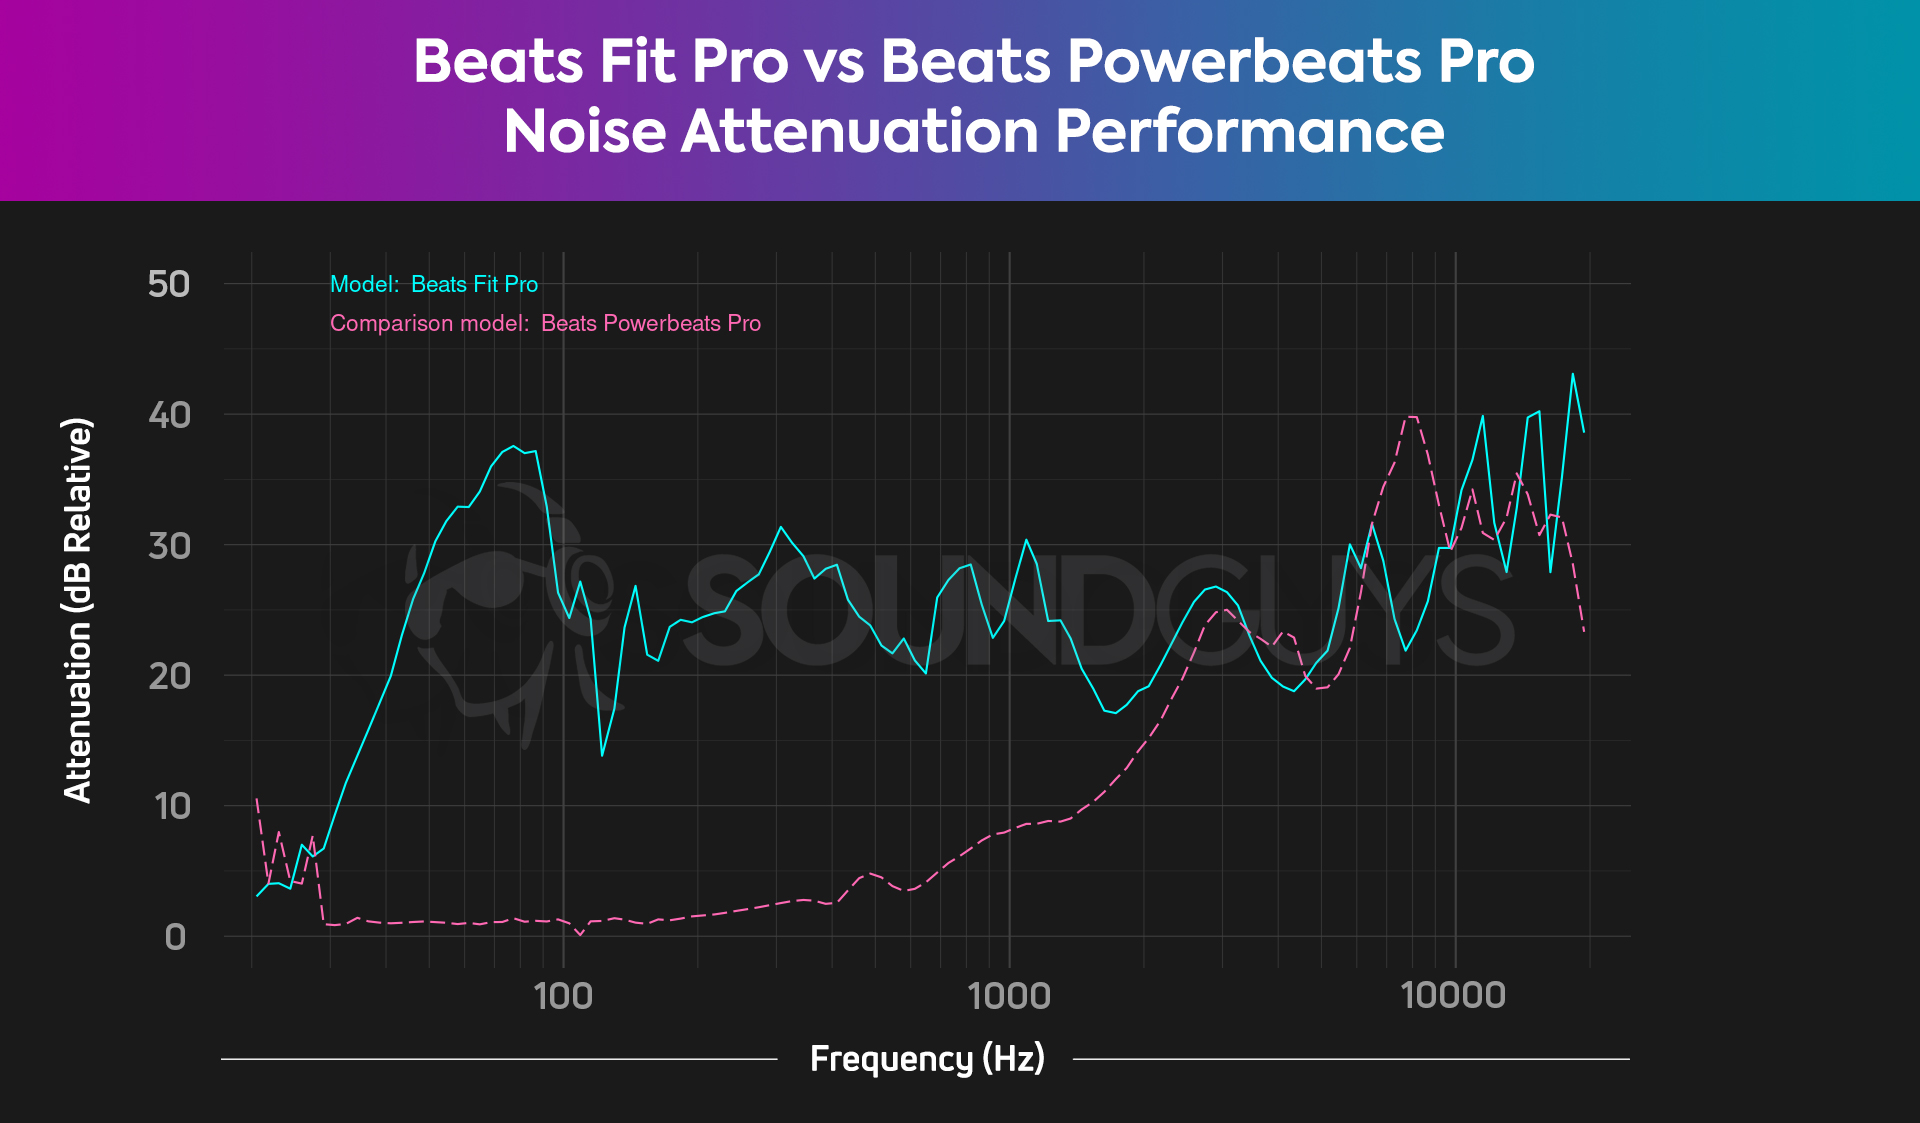 A chart showing the difference in noise attenuation performance between the Beats Powerbeats Pro and the Beats Fit Pro.